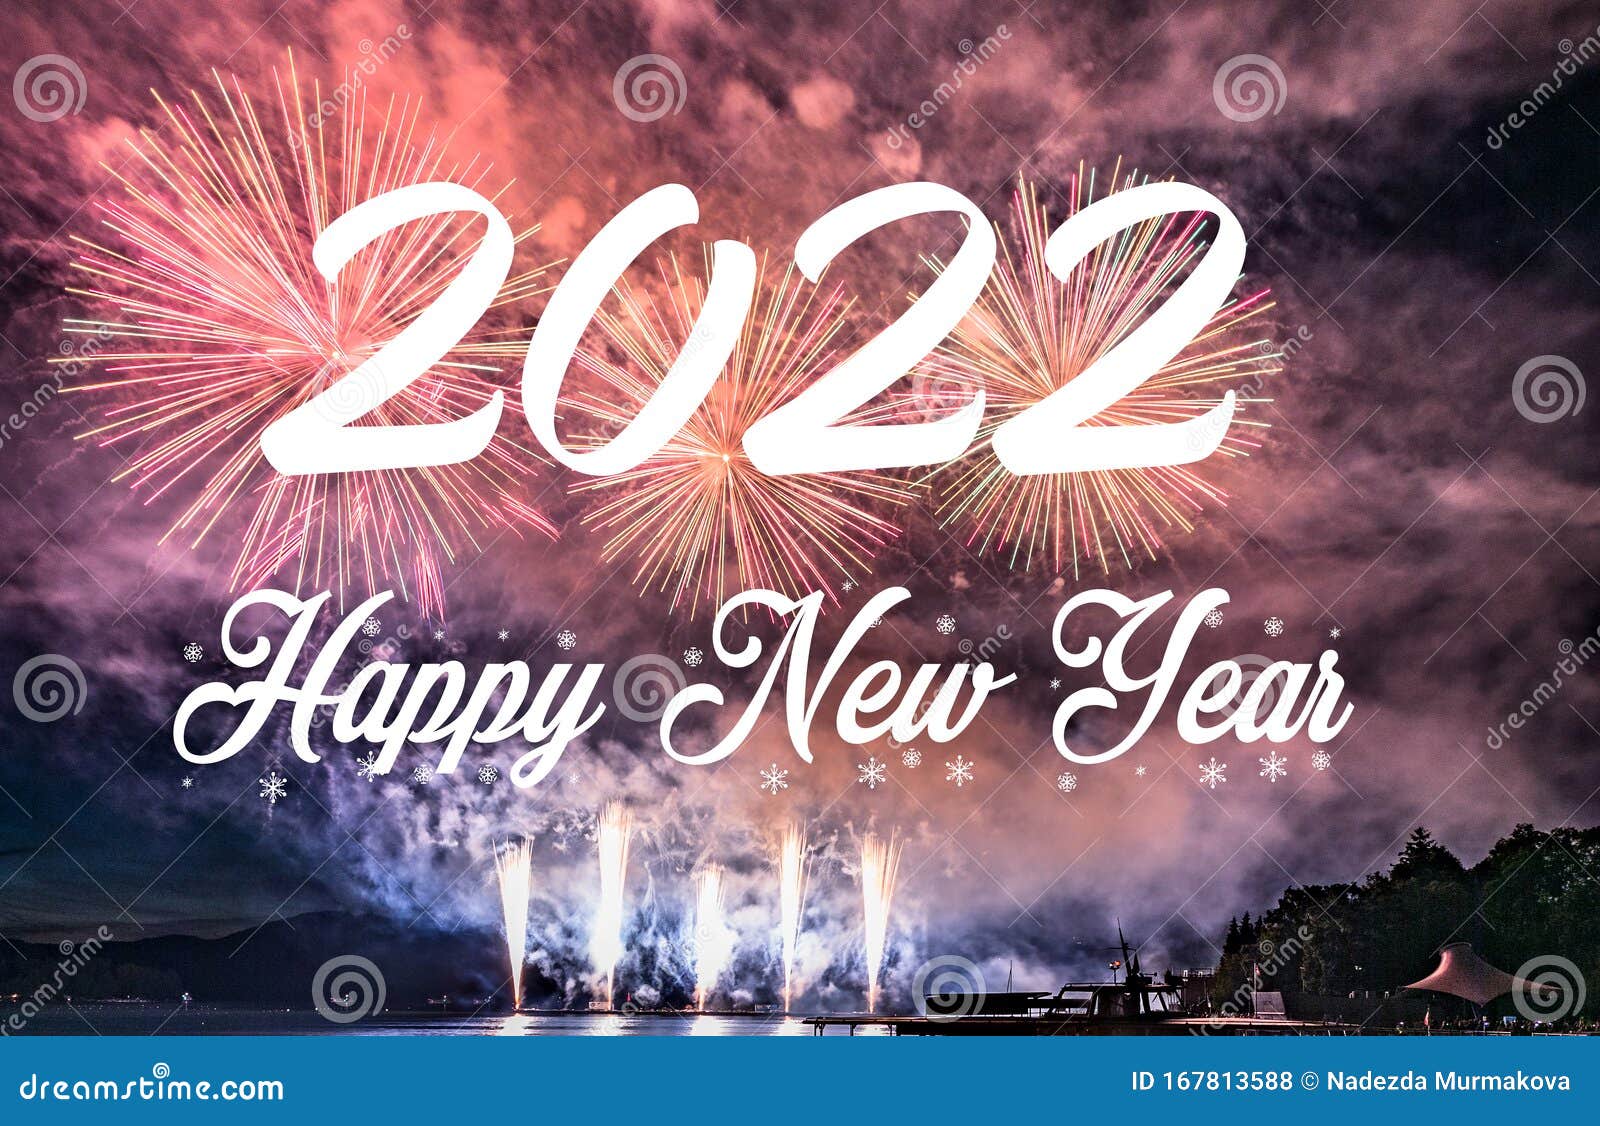  Happy  New  Year  2022  With Fireworks Background Stock Photo 